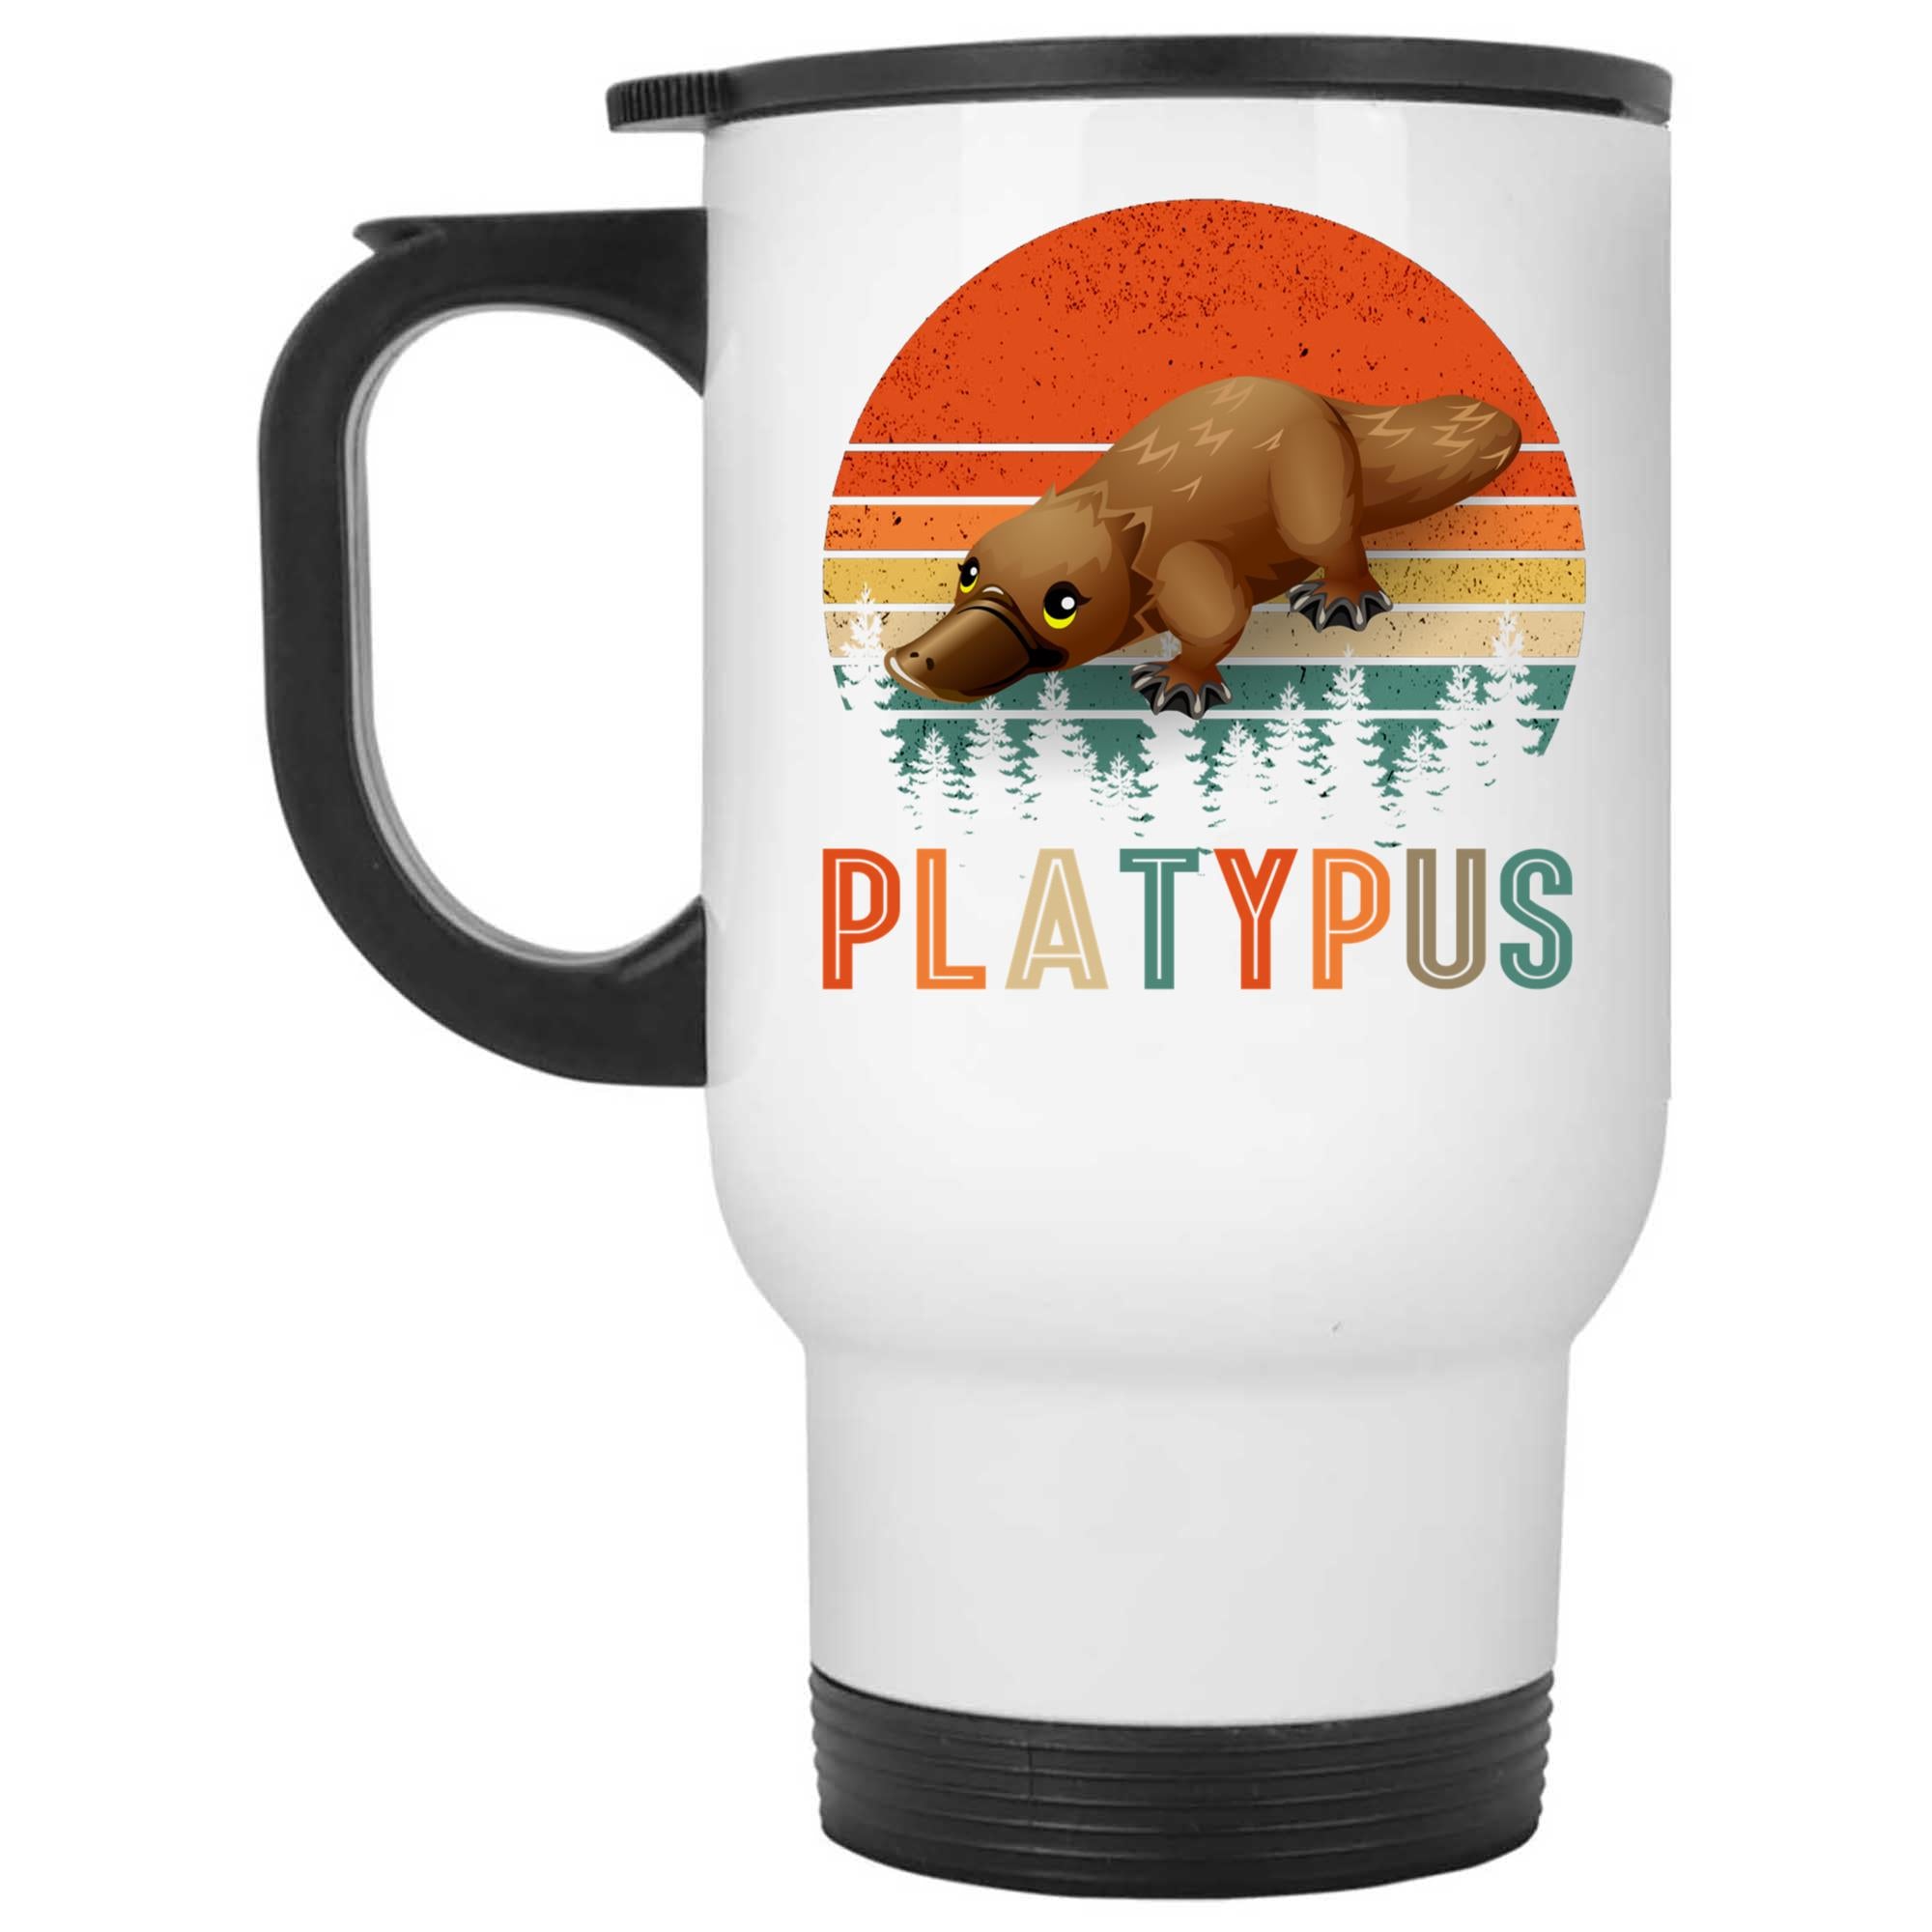 Skitongifts Funny Ceramic Coffee Mug For Birthday, Mother's Day, Father's Day, Christmas NH181221-Vintage Retro Platypus Bq87S2P